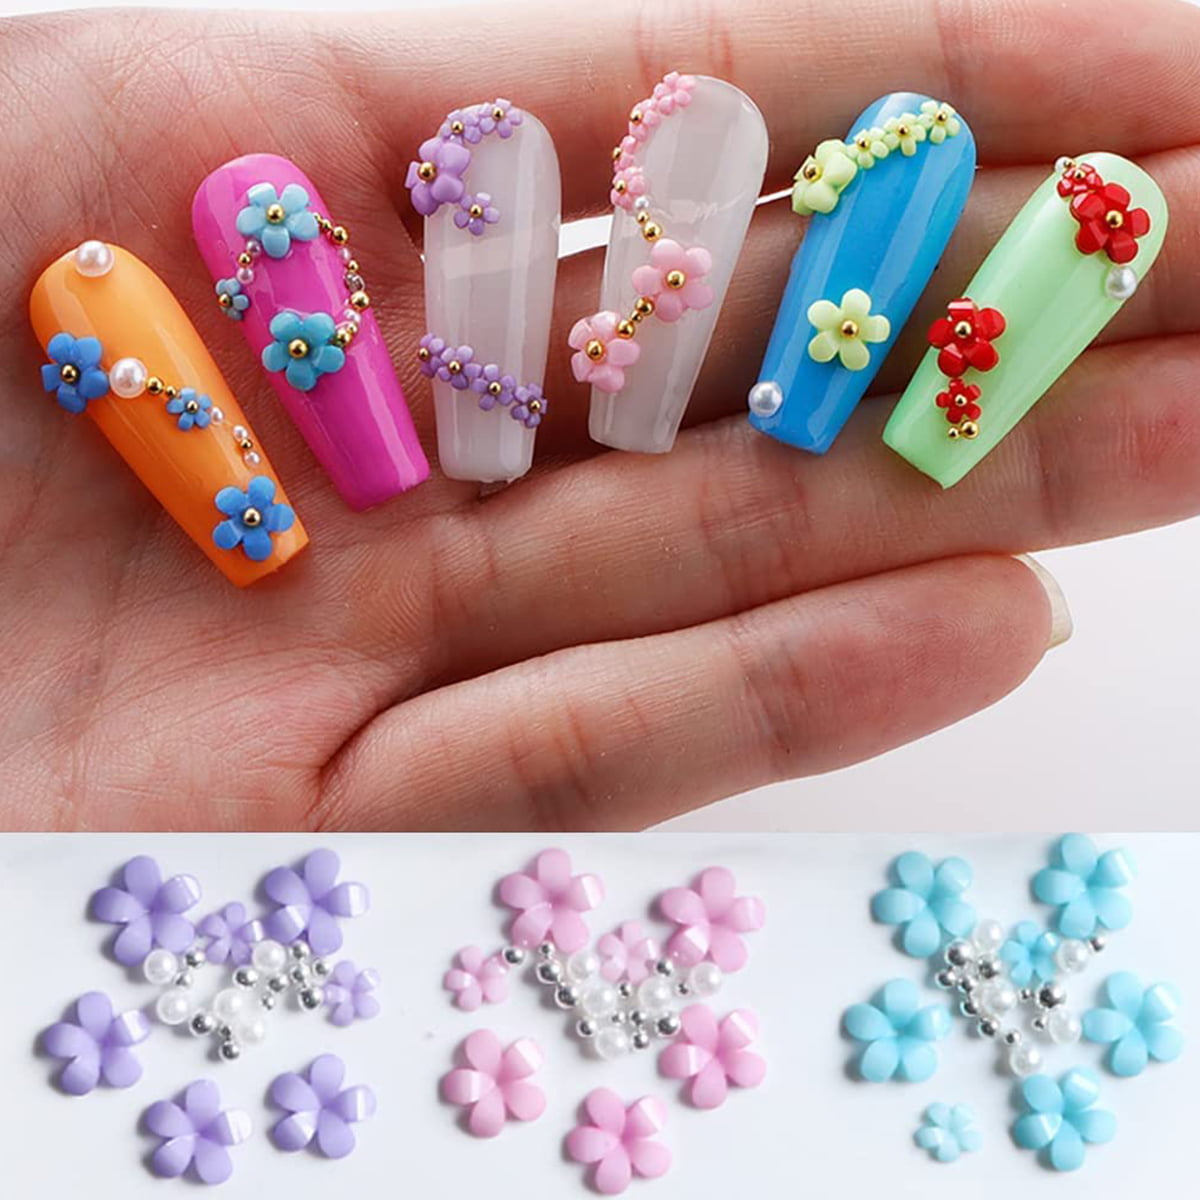 3D Nail Art Flower Charms For Nails Flower，Nail Jewels And